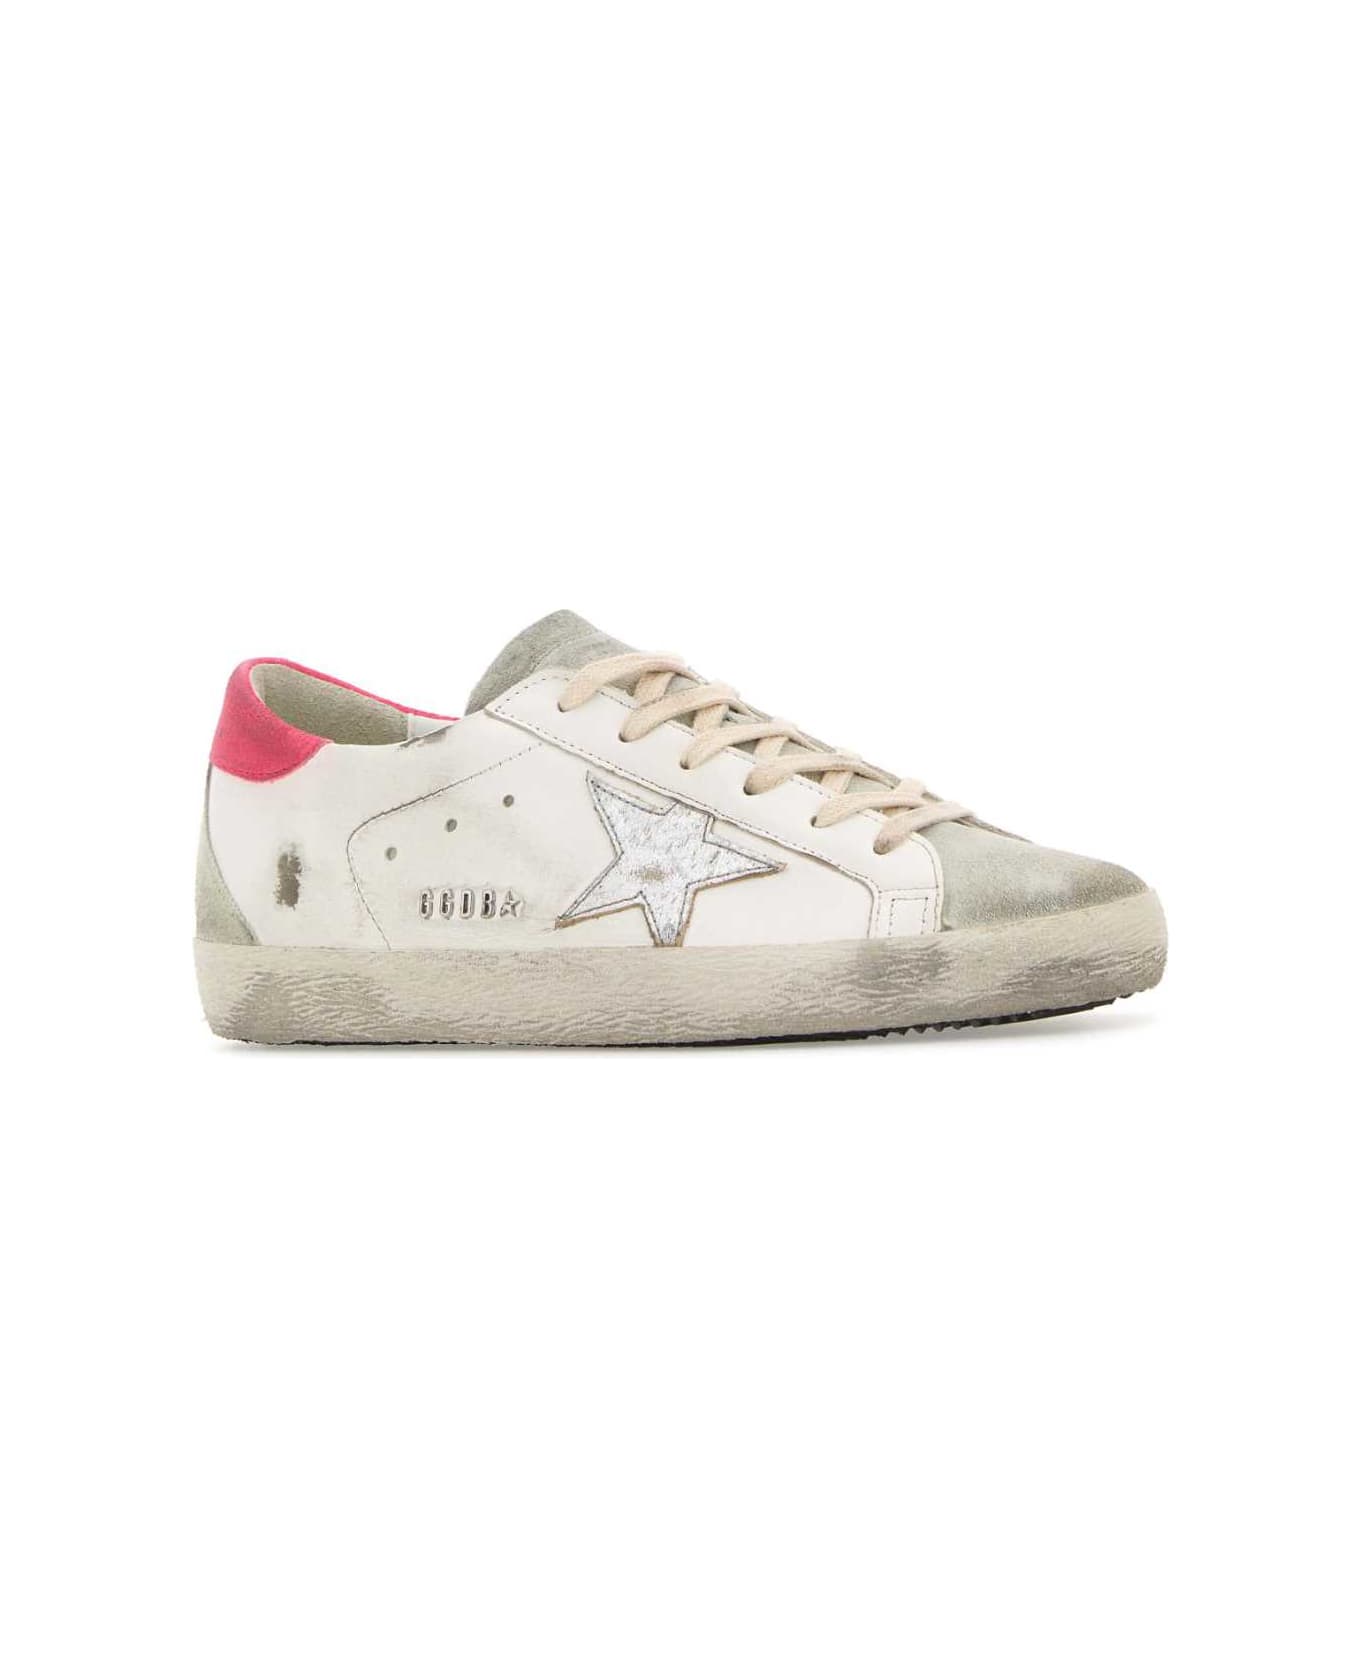 Golden Goose Multicolor Leather Superstar Sneakers - WHITEICESILVERLOBSTERFLUO